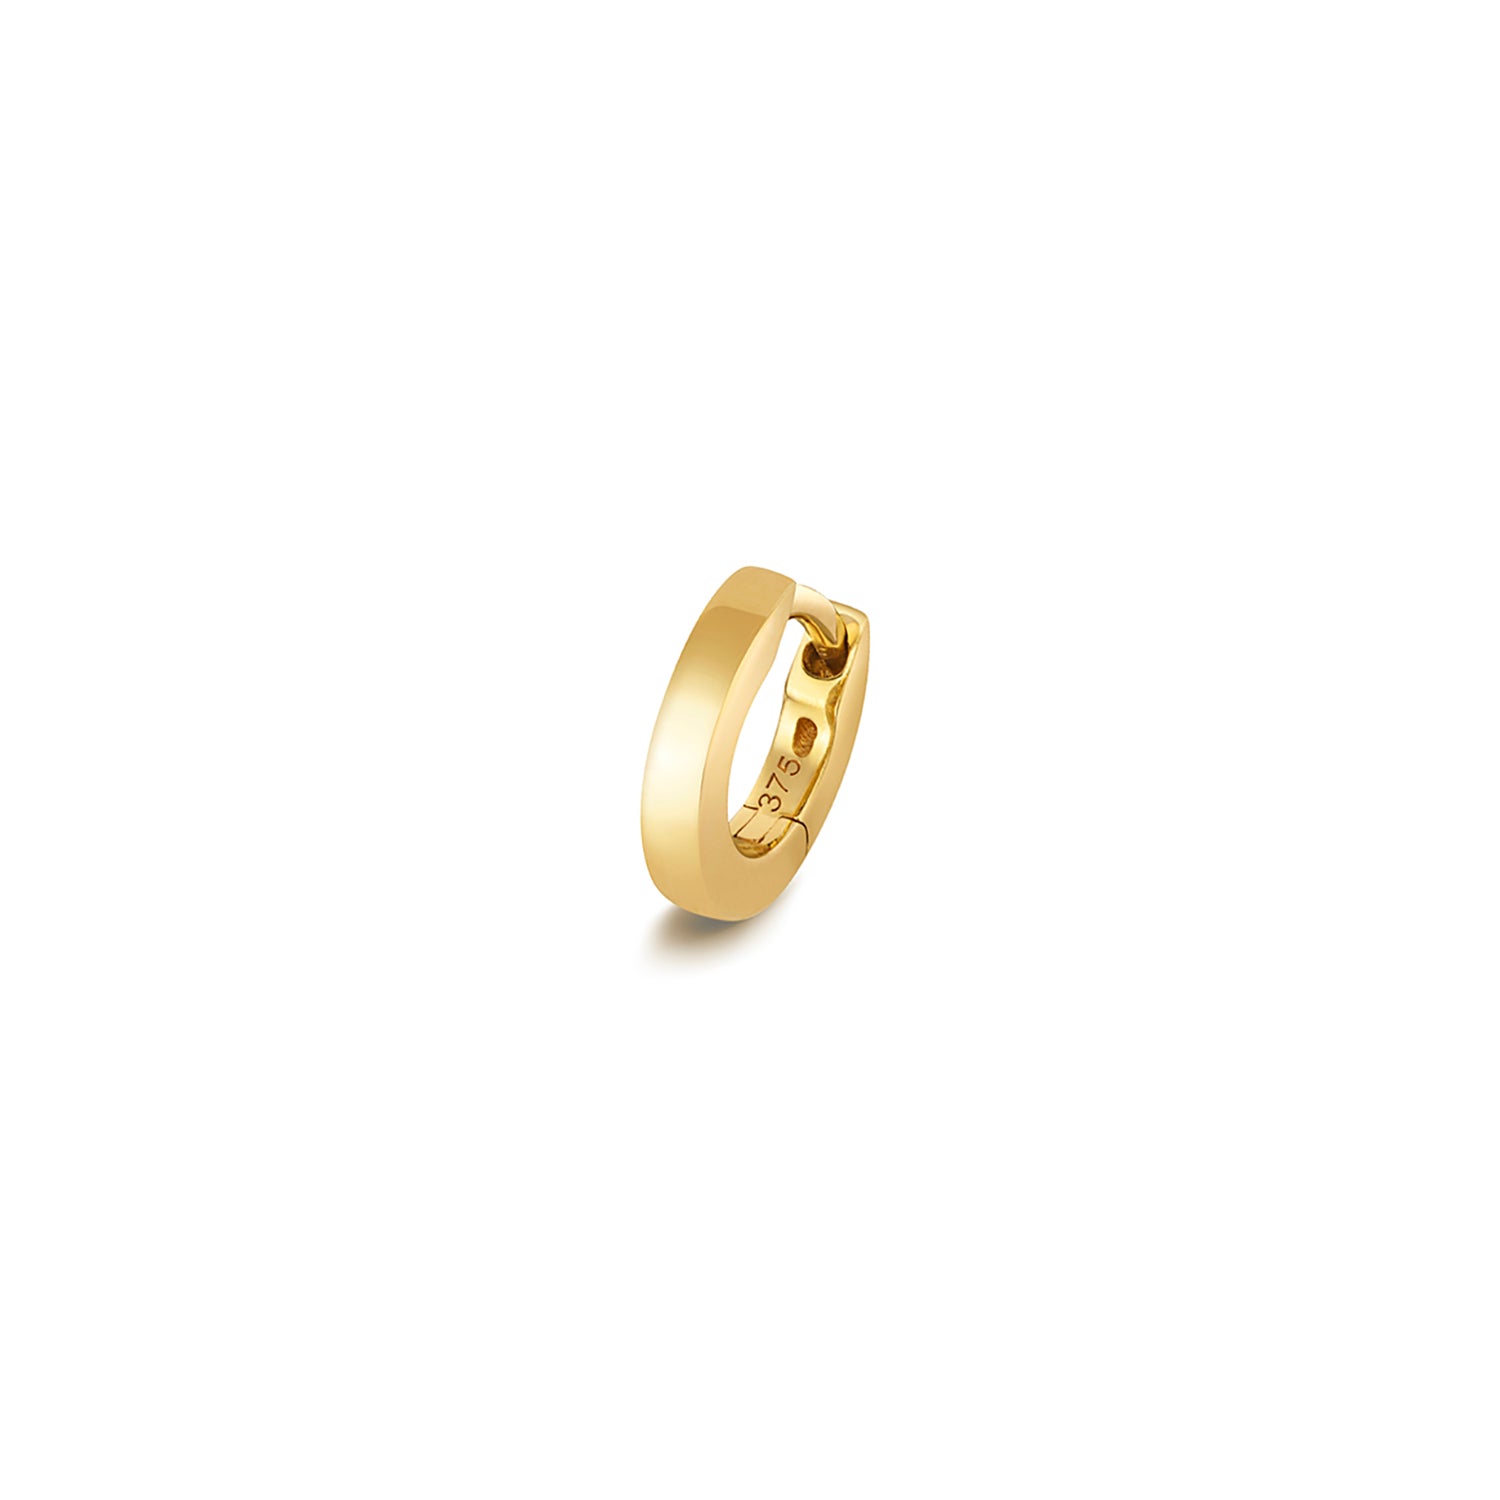 9CT GOLD CARTILAGE EARRING SOLID SQ TUBE